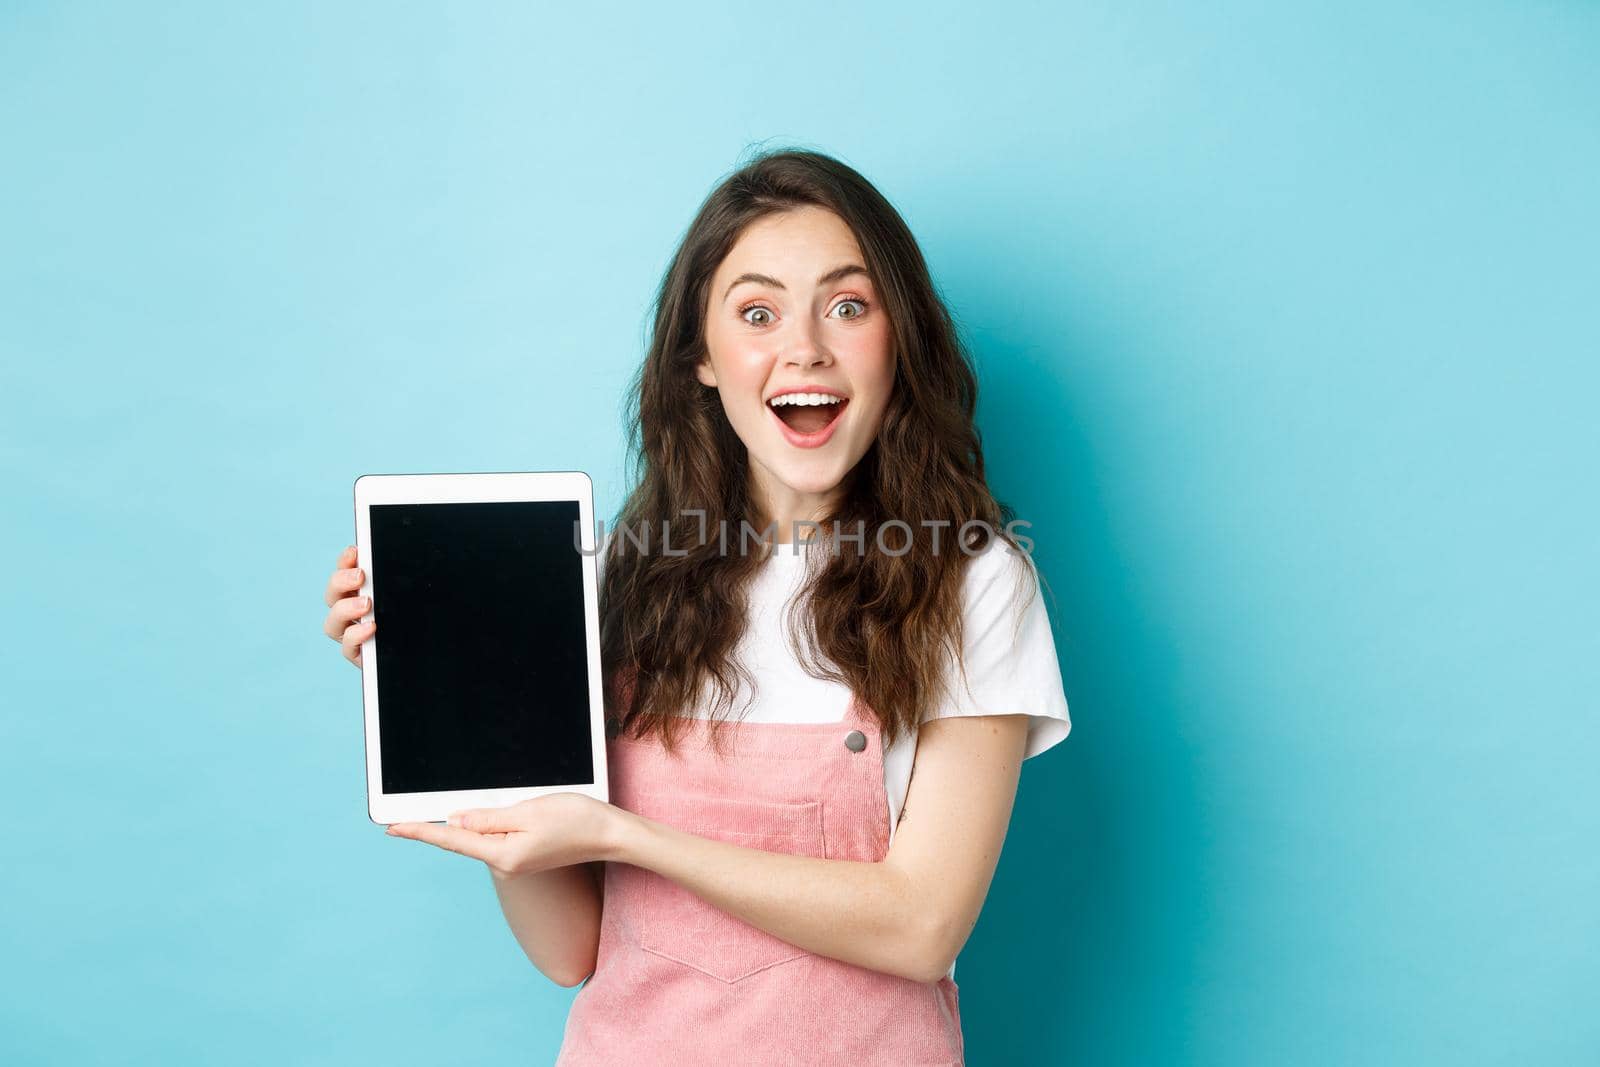 Amused pretty girl demonstrate blank digital tablet screen and smiling excited at camera, showing awesome promo offer, standing against blue background.